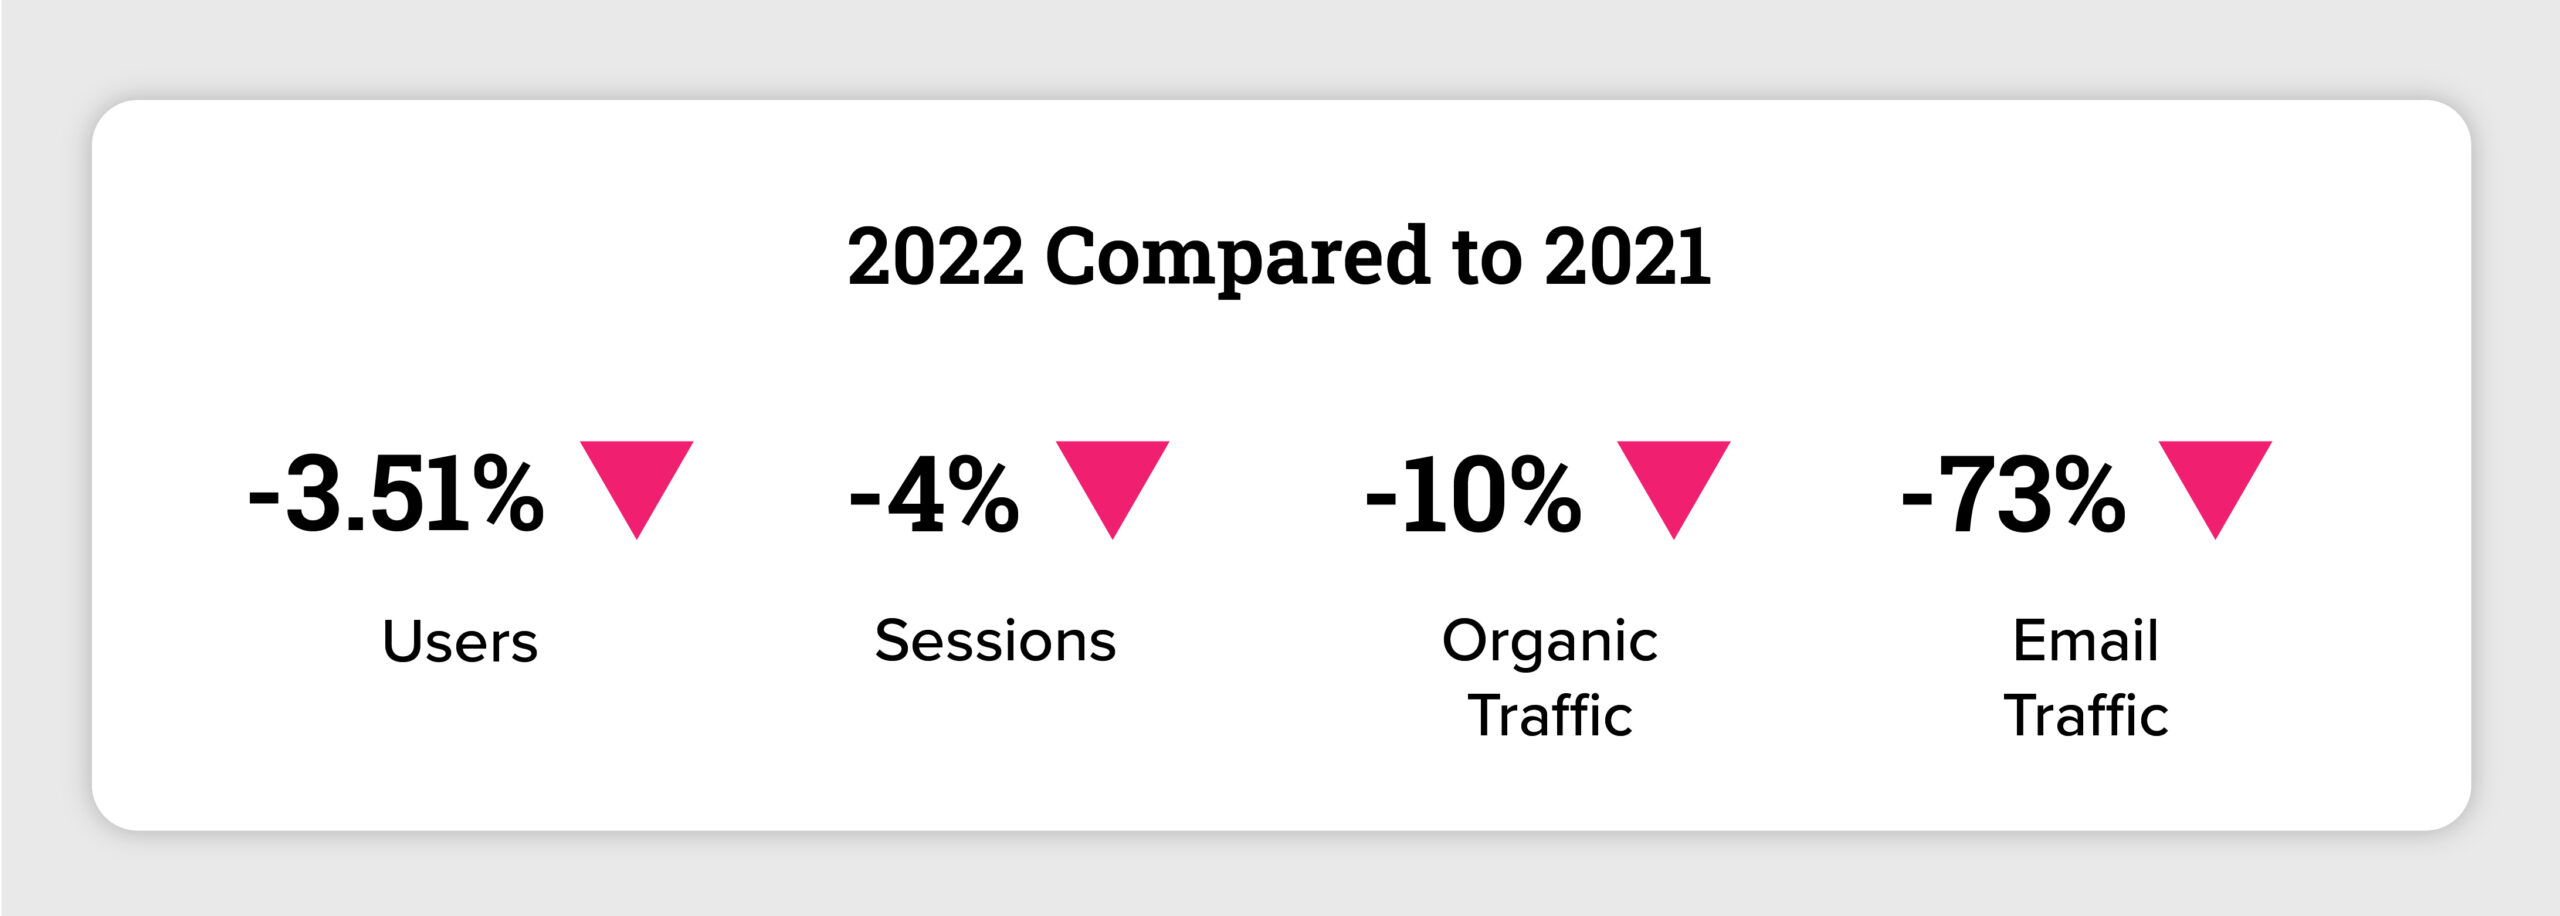 Scorecard chart showing 2022 compared to 2021: -3.51% users, -4% sessions, -10% organic traffic, -73% email traffic.